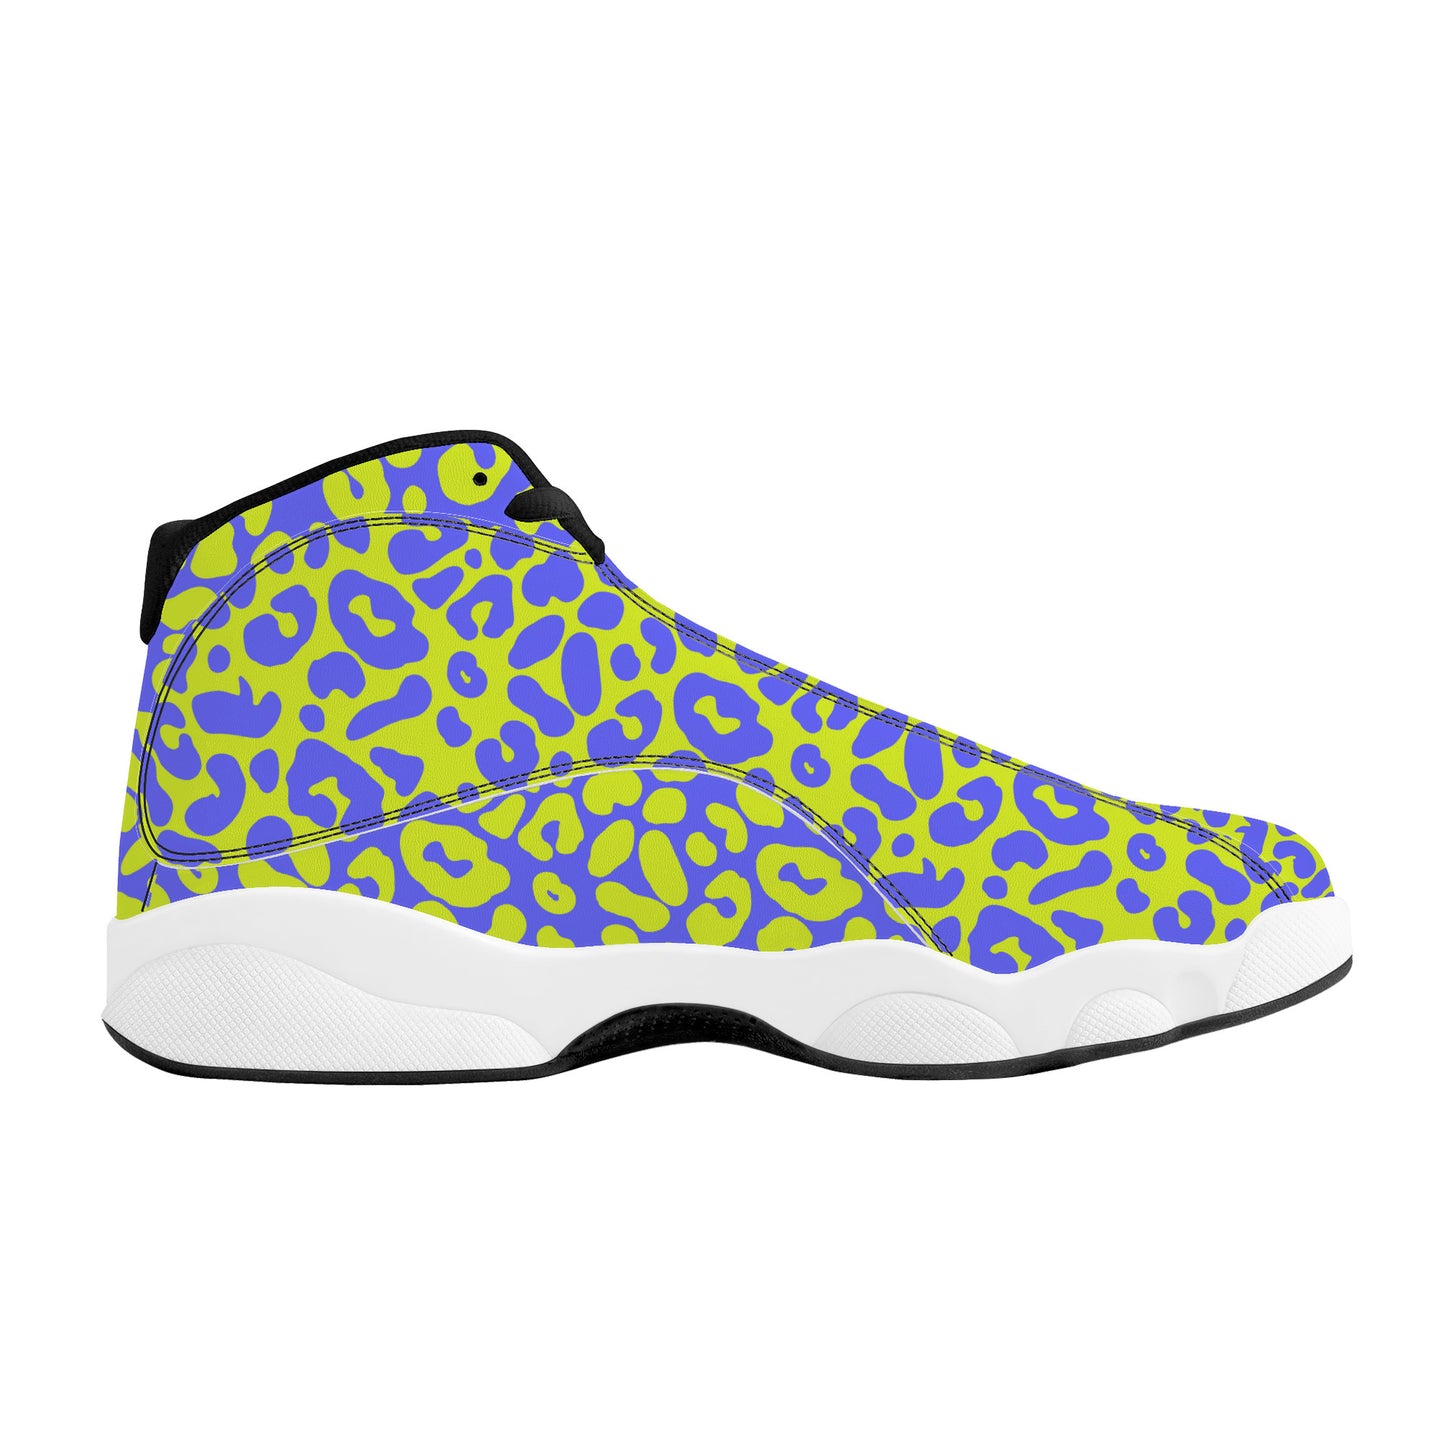 "Leopard" Basketball Shoes